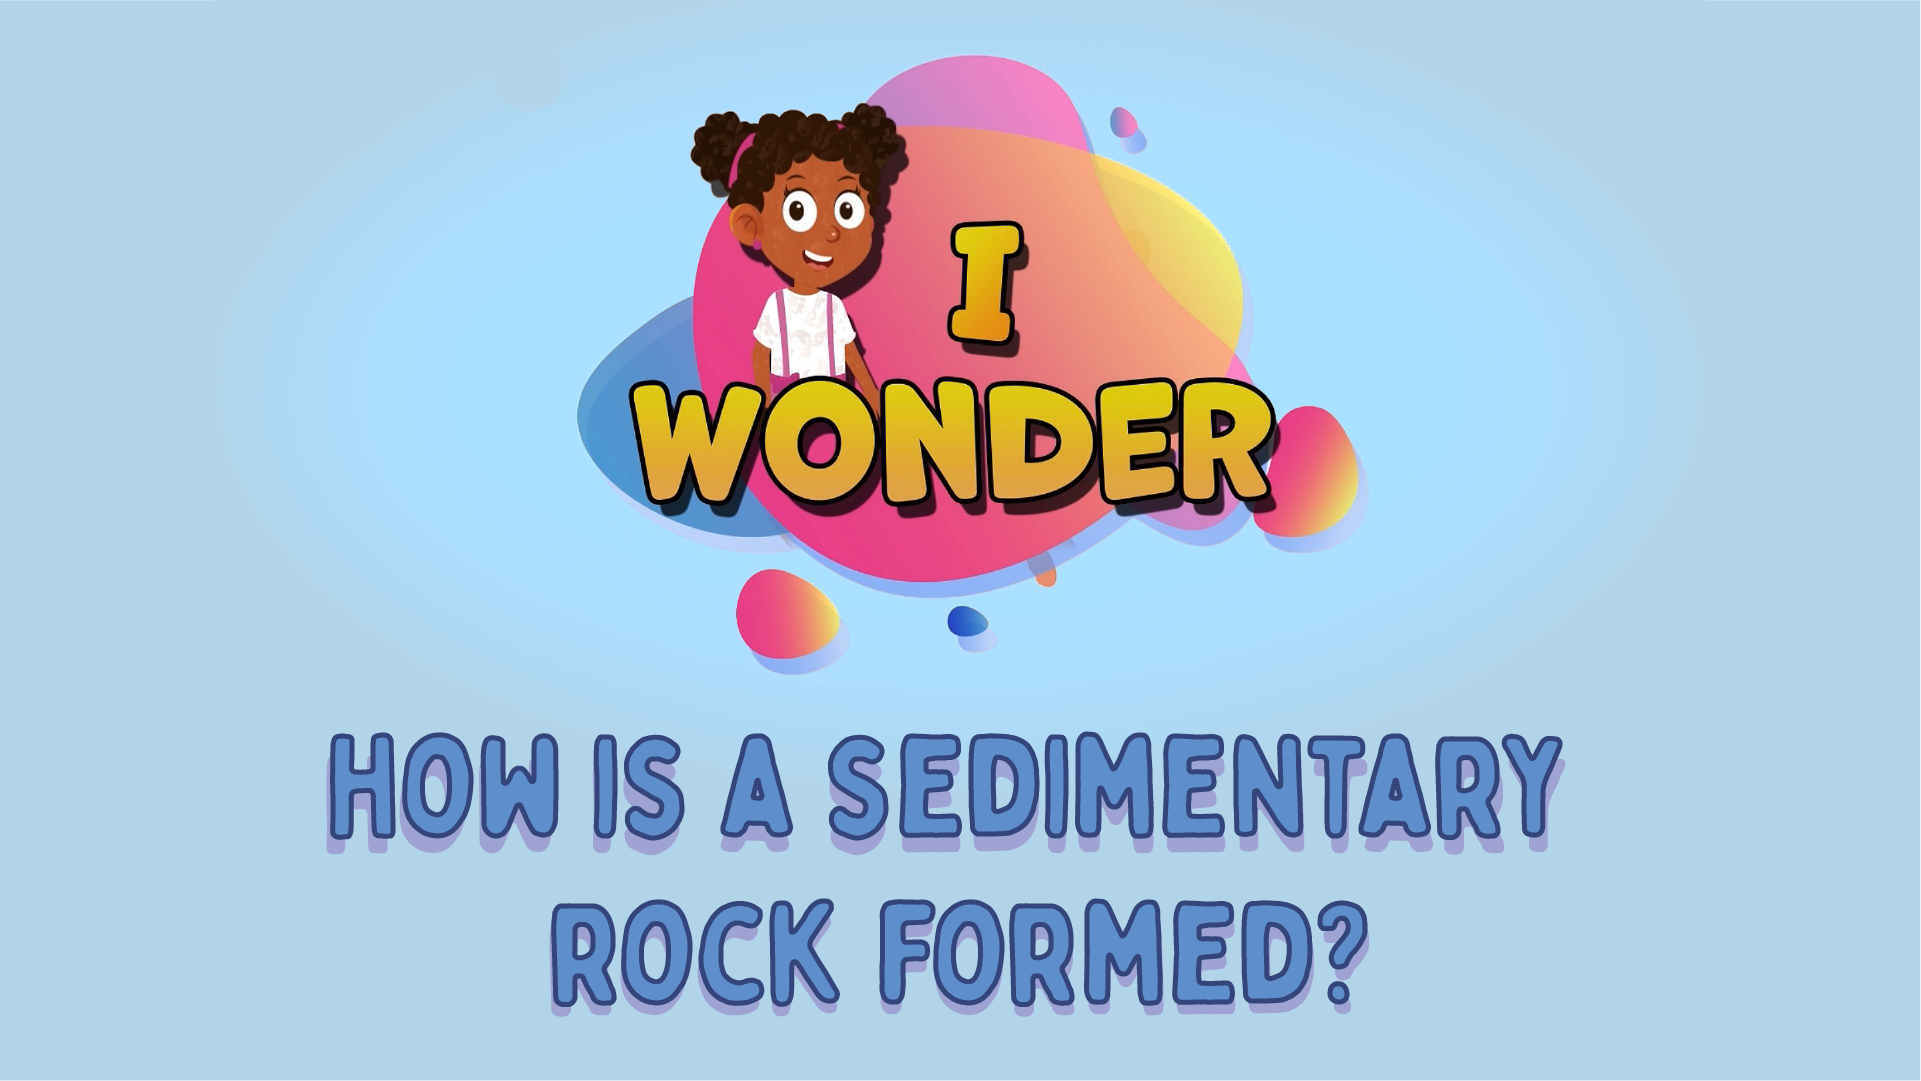 How Is A Sedimentary Rock Formed?